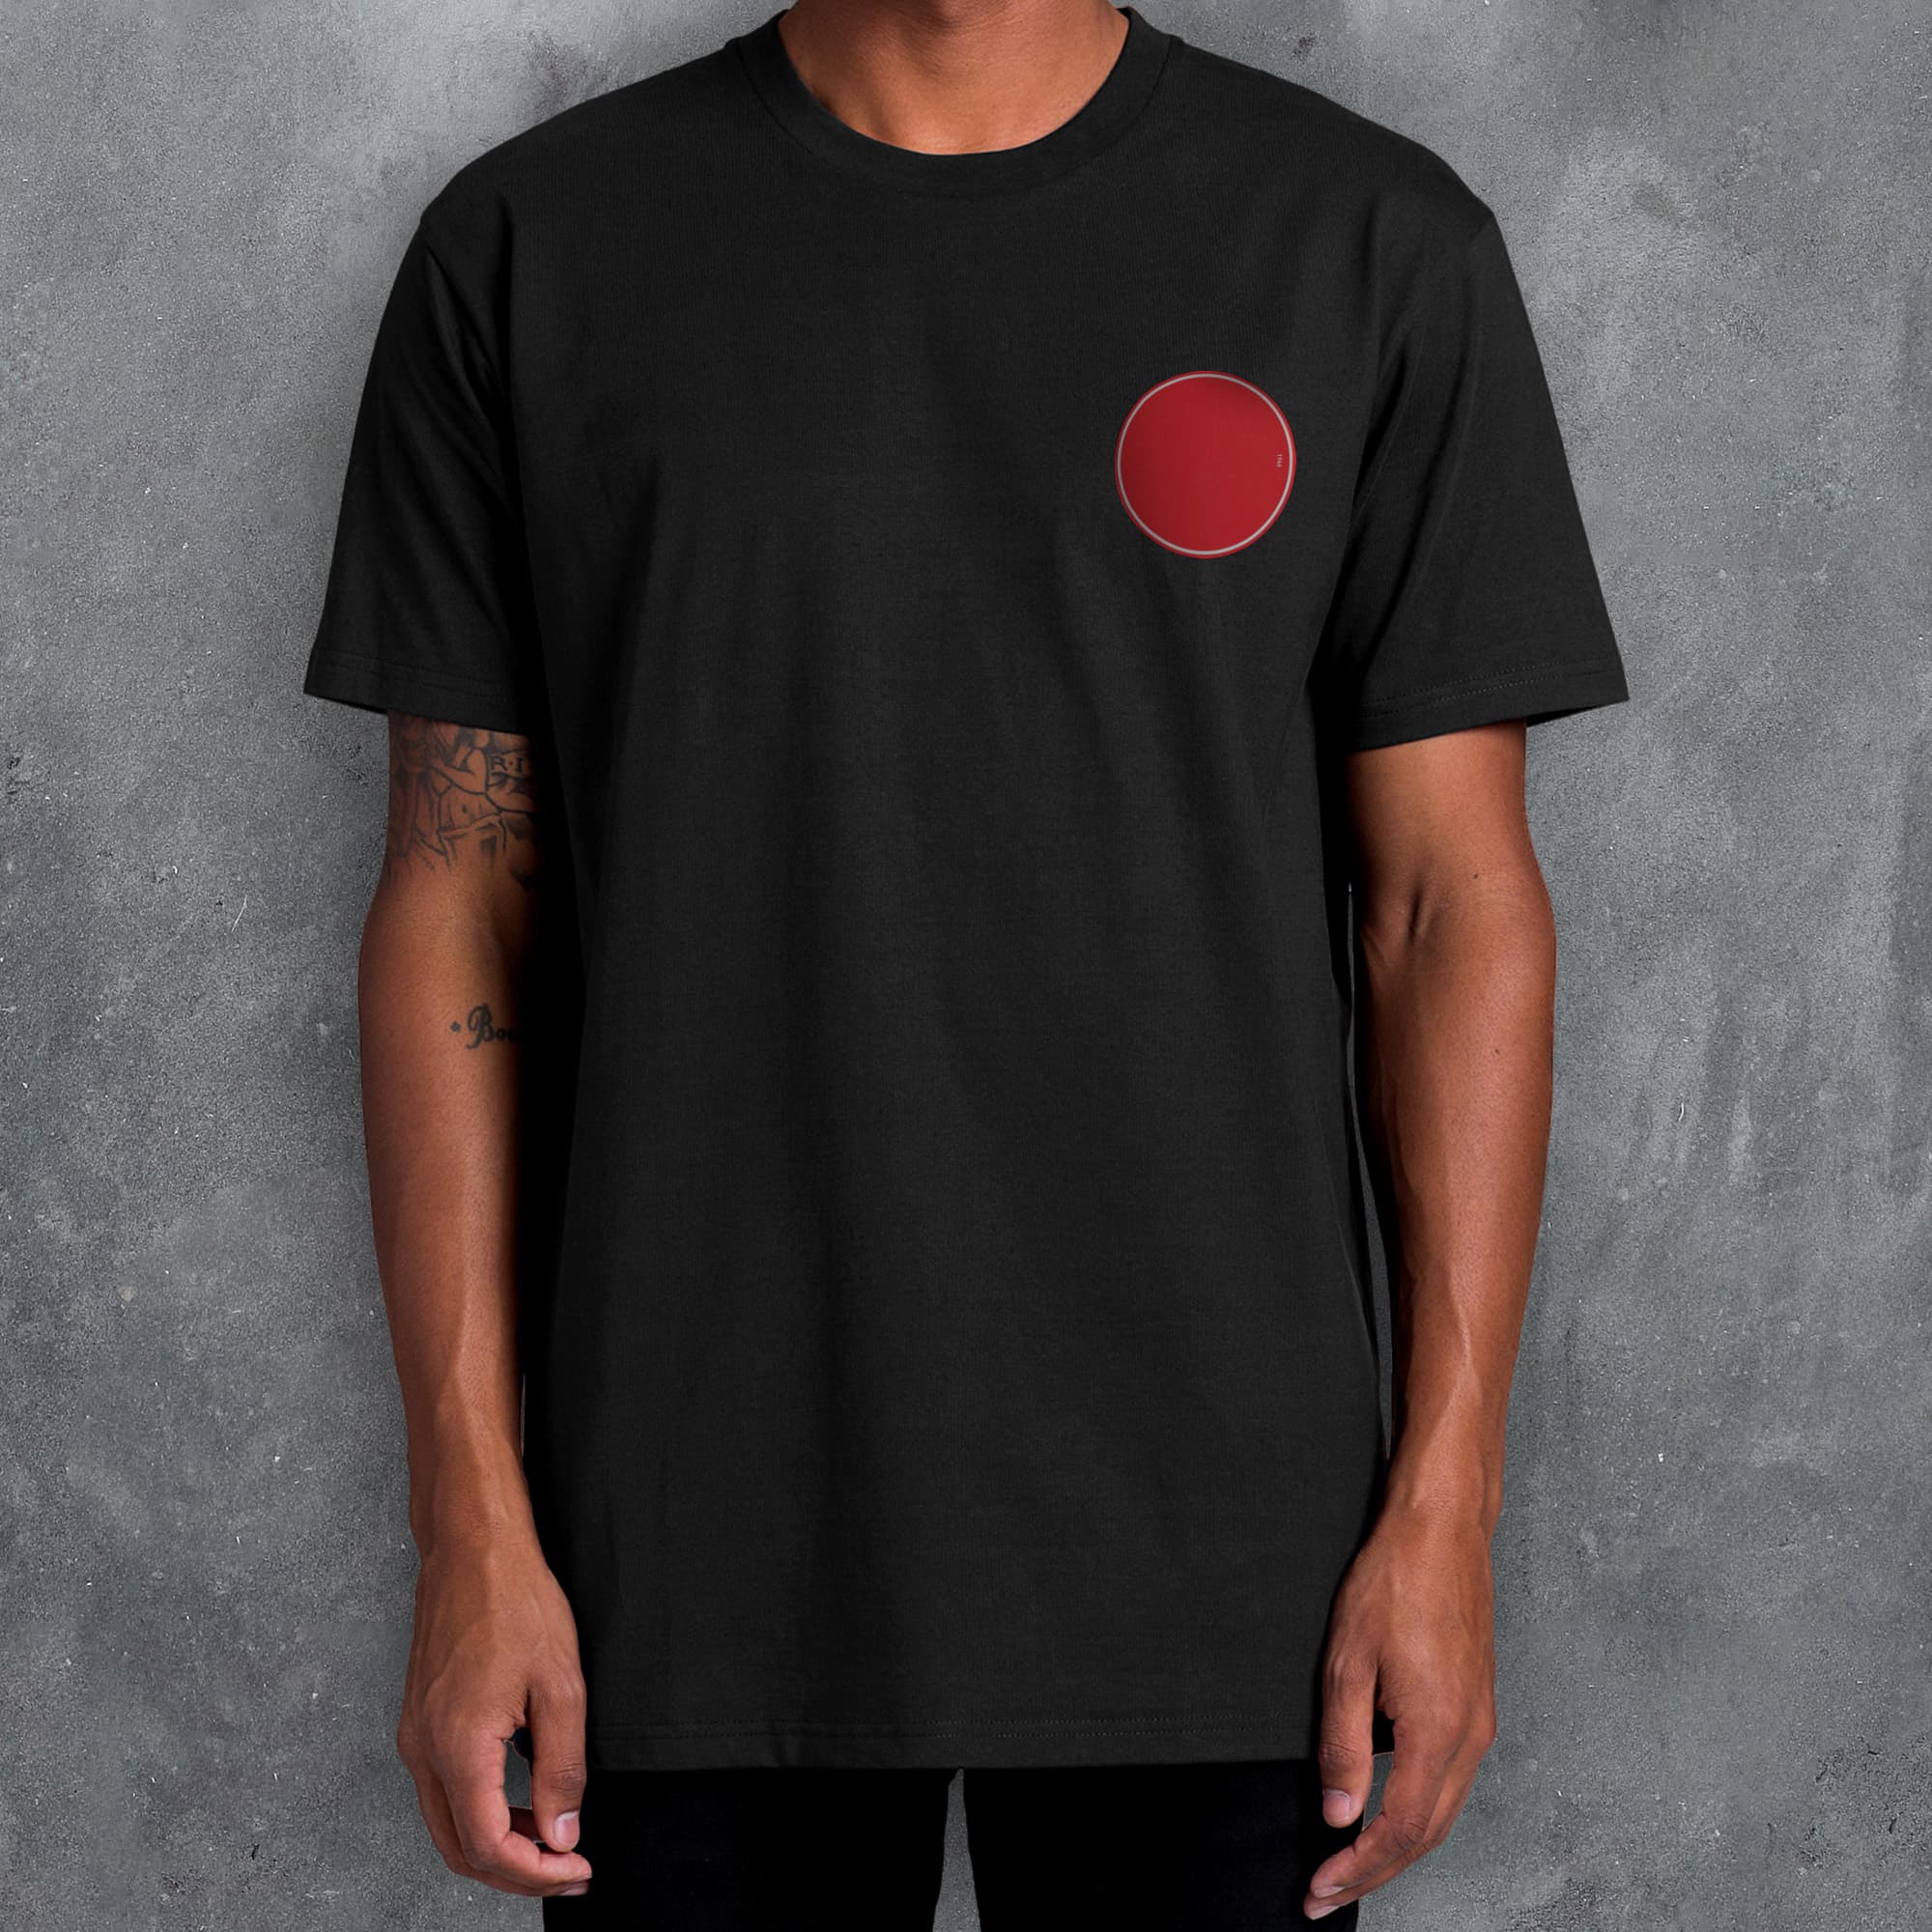 a man wearing a black t - shirt with a red circle on it